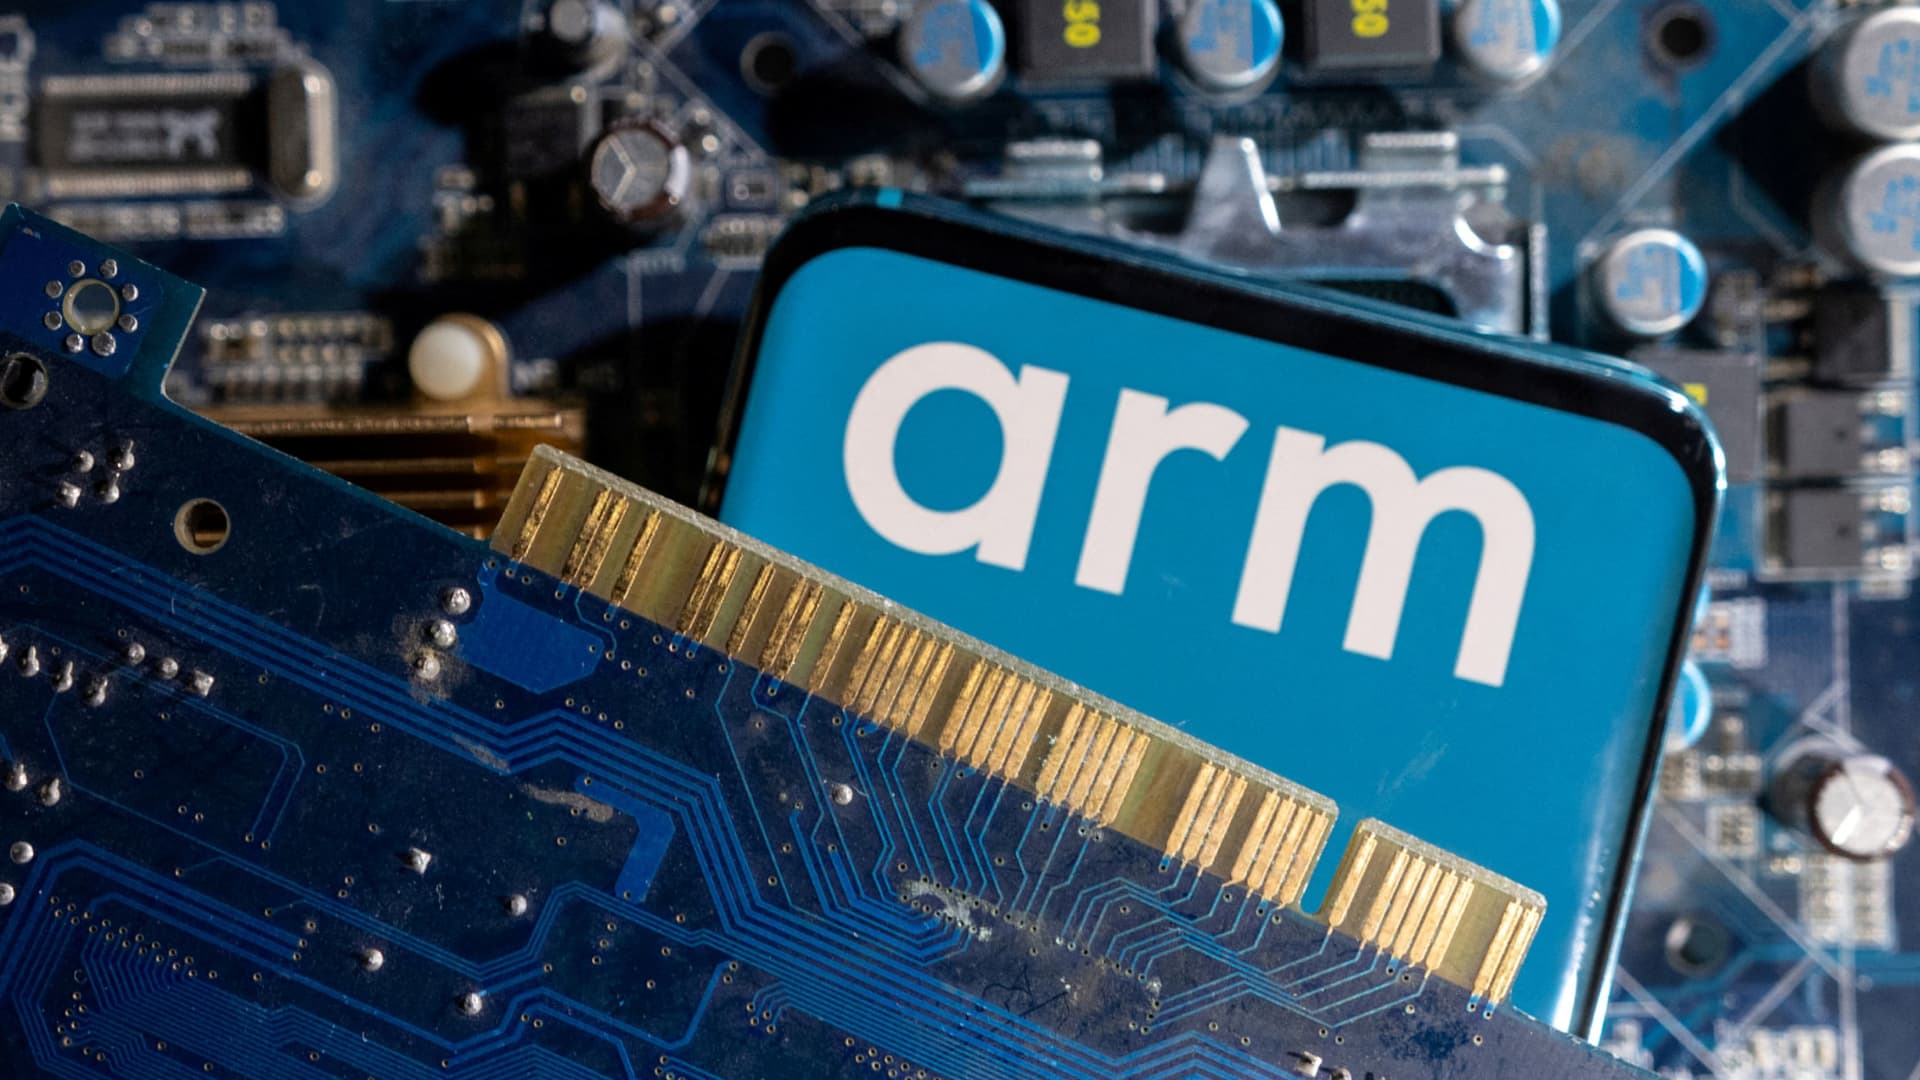 Arm’s biggest customers are also backing a rival chip design â here’s what you need to know